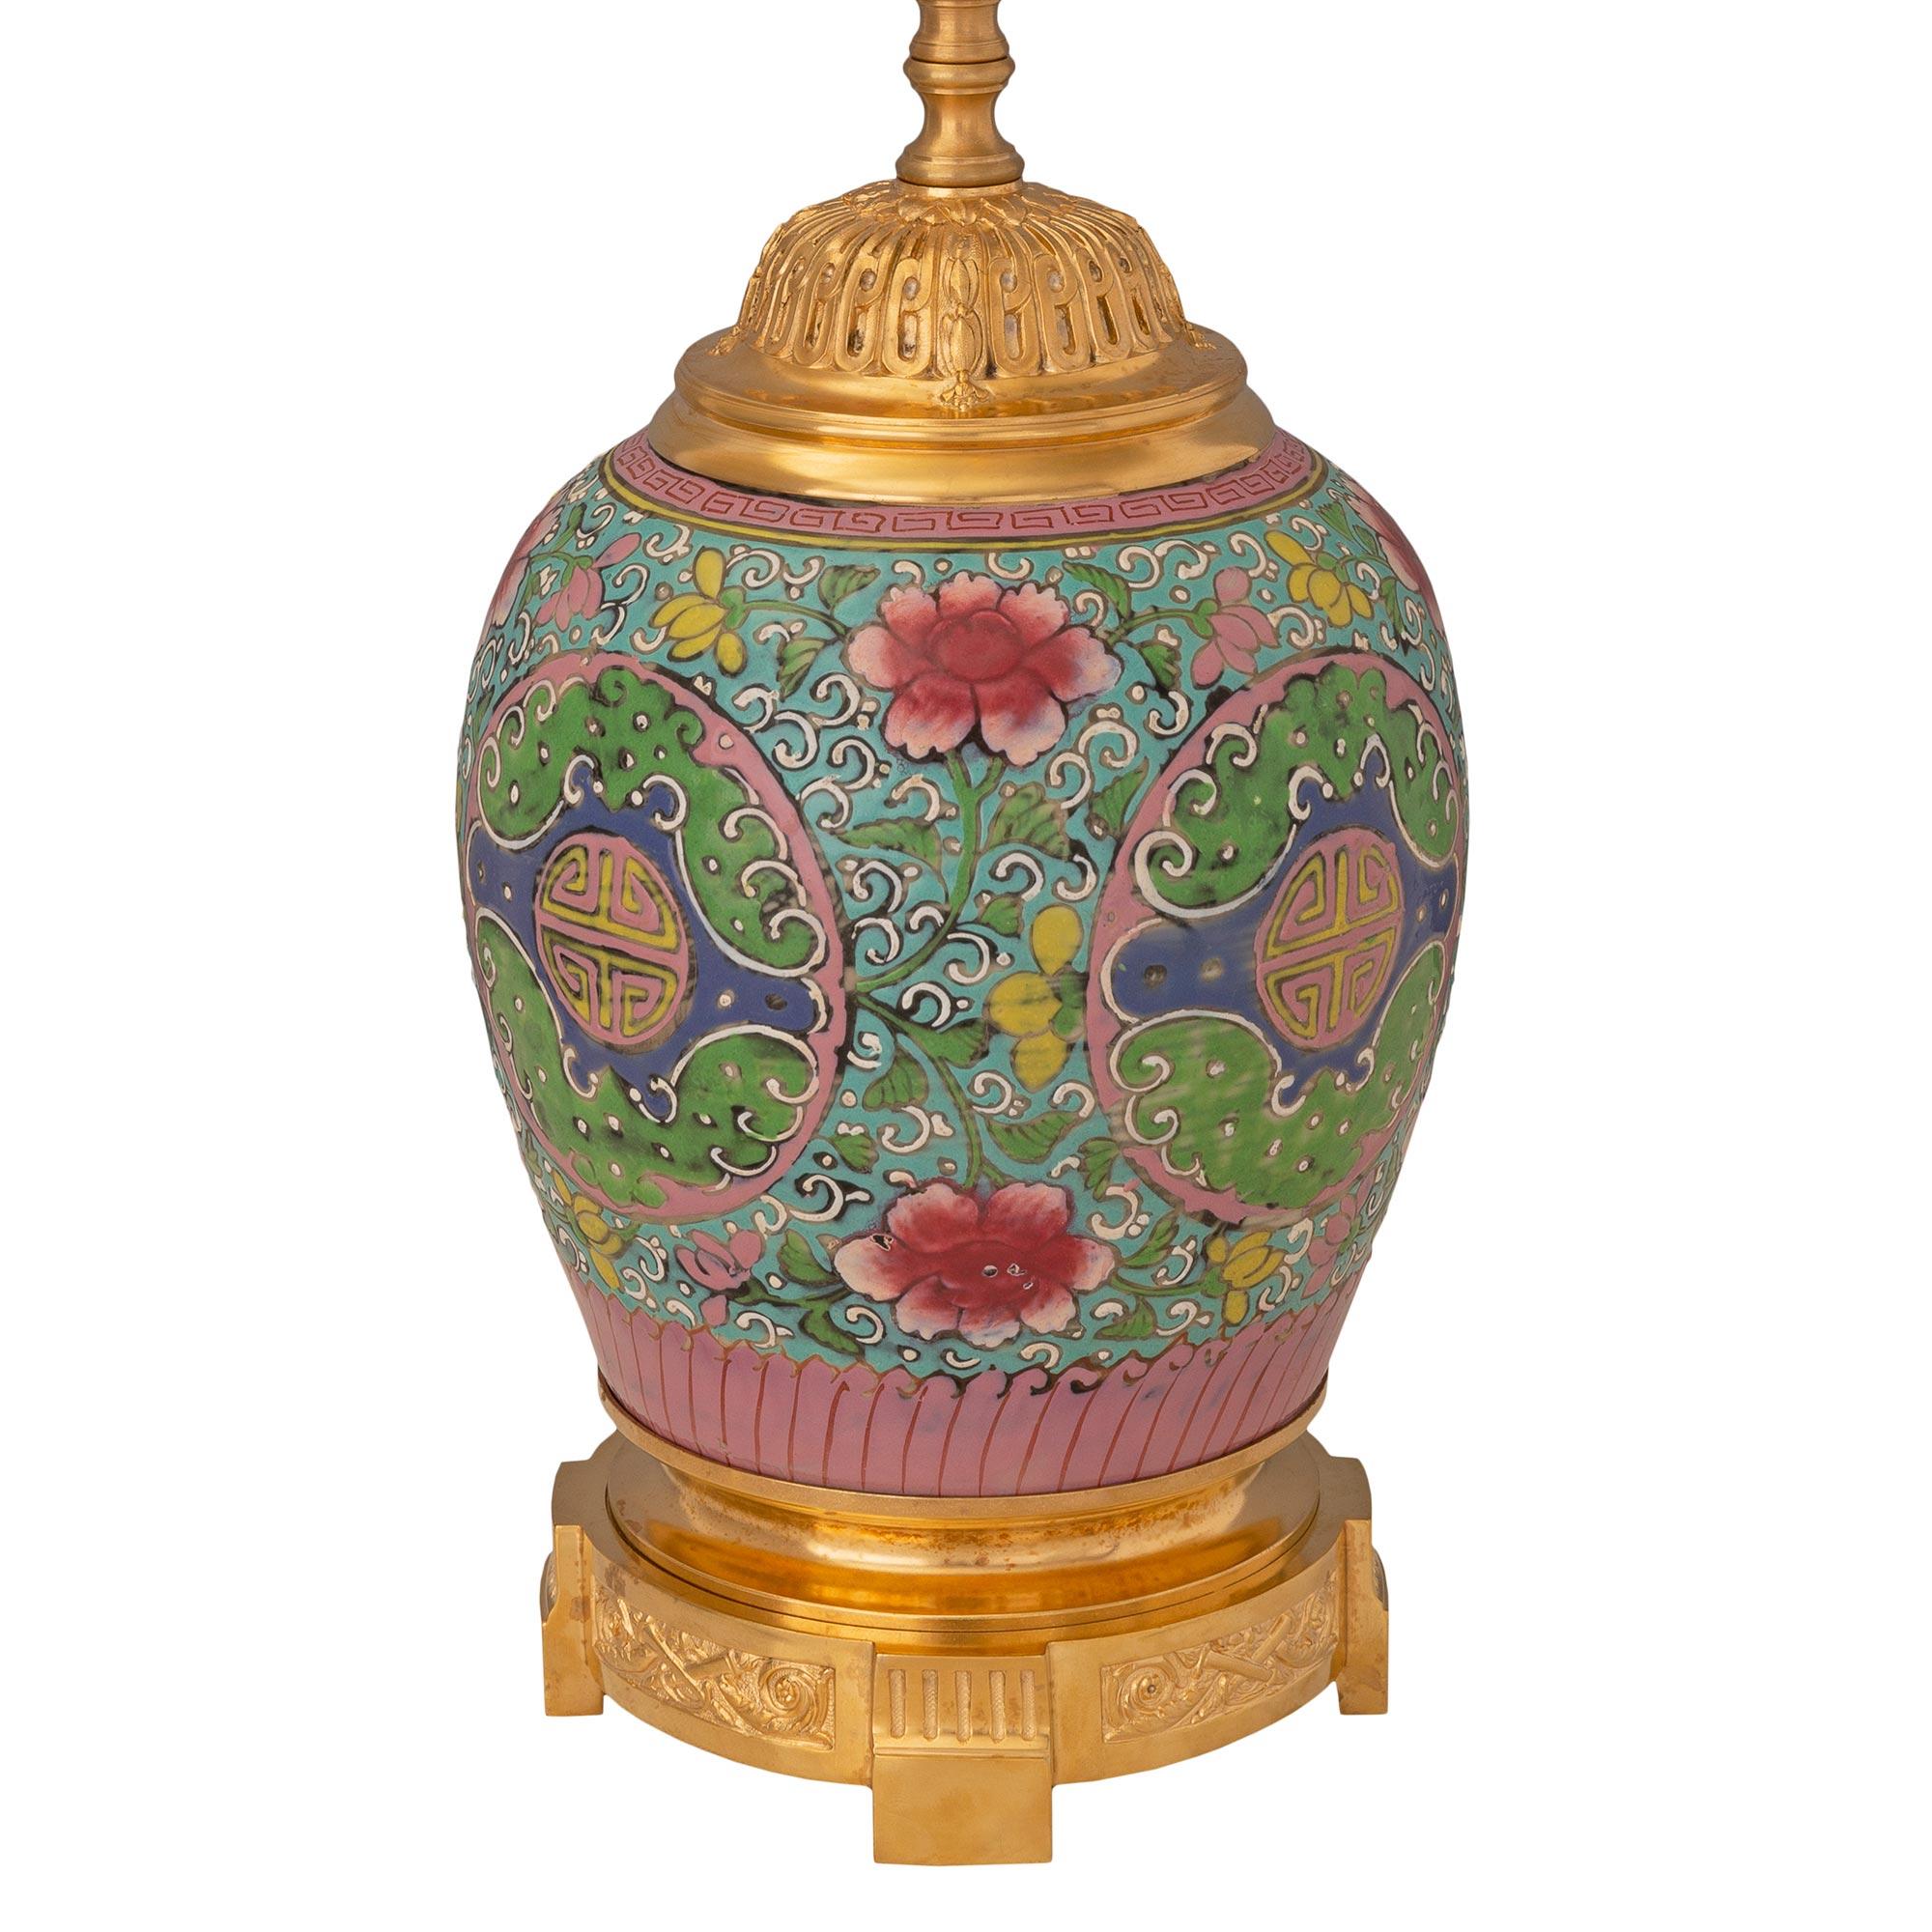 A beautiful French and Asian collaboration 19th century Louis XVI st. Belle Époque period Famille Rose porcelain and ormolu lamp. The lamp is raised by an elegant circular mottled ormolu base with fine fluted block feet and lovely fitted scrolled